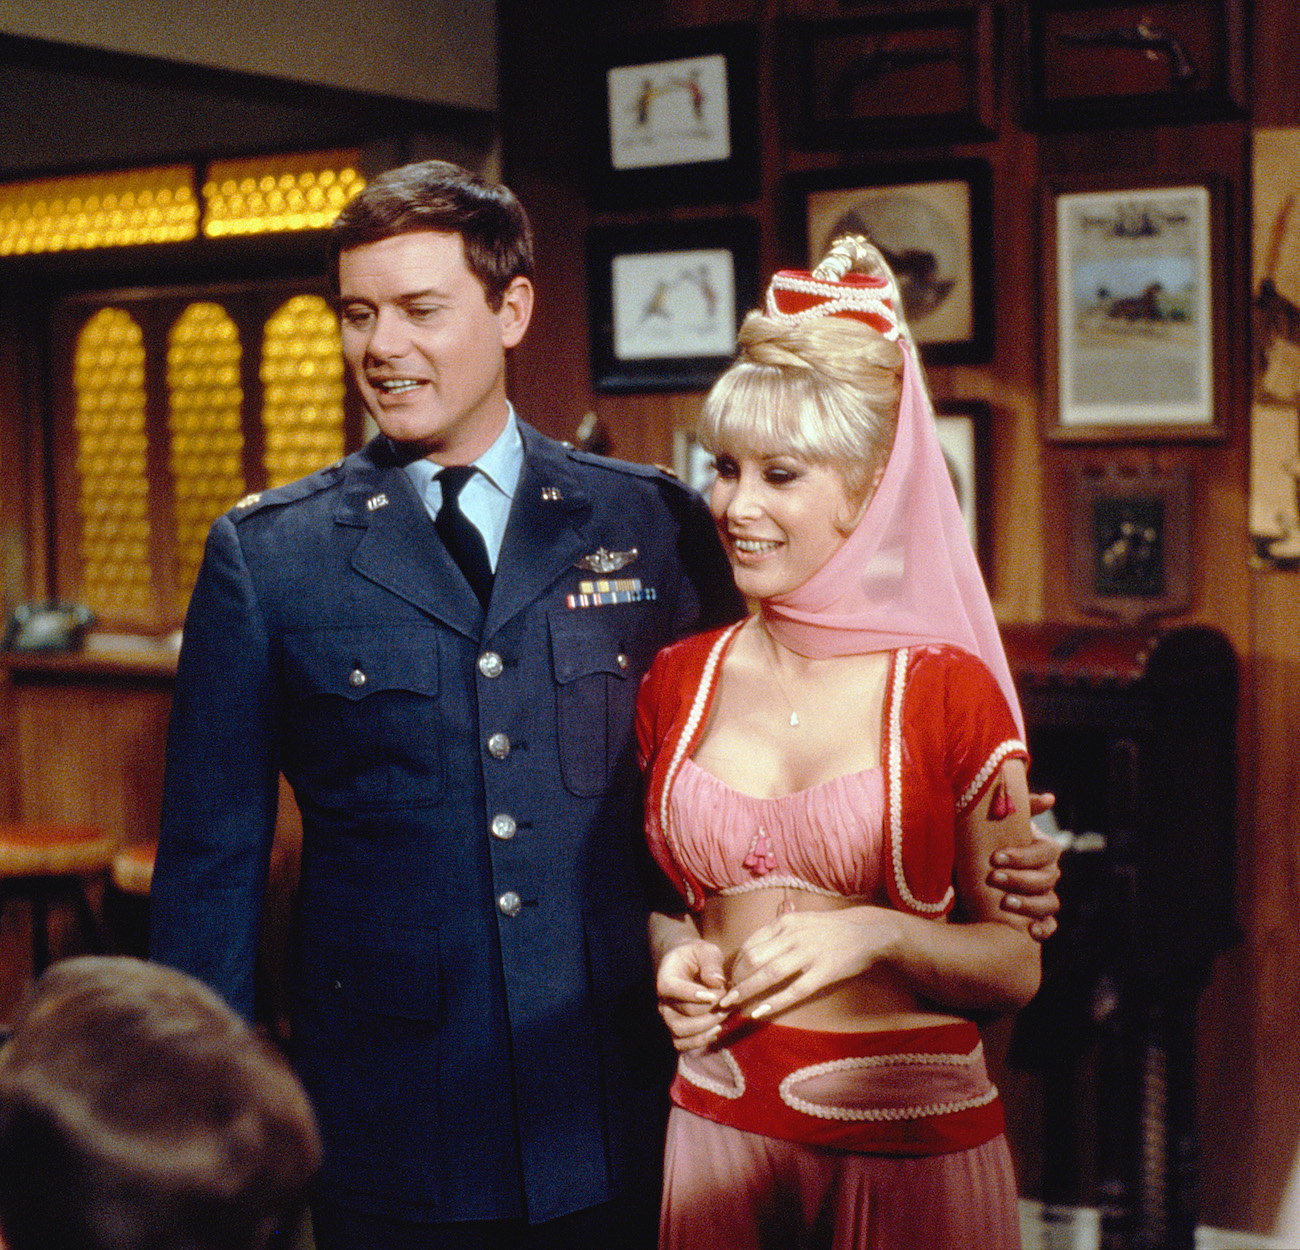 I Dream Of Jeannie Larry Hagman Took This Anything Goes Approach To Relax Before His Scenes